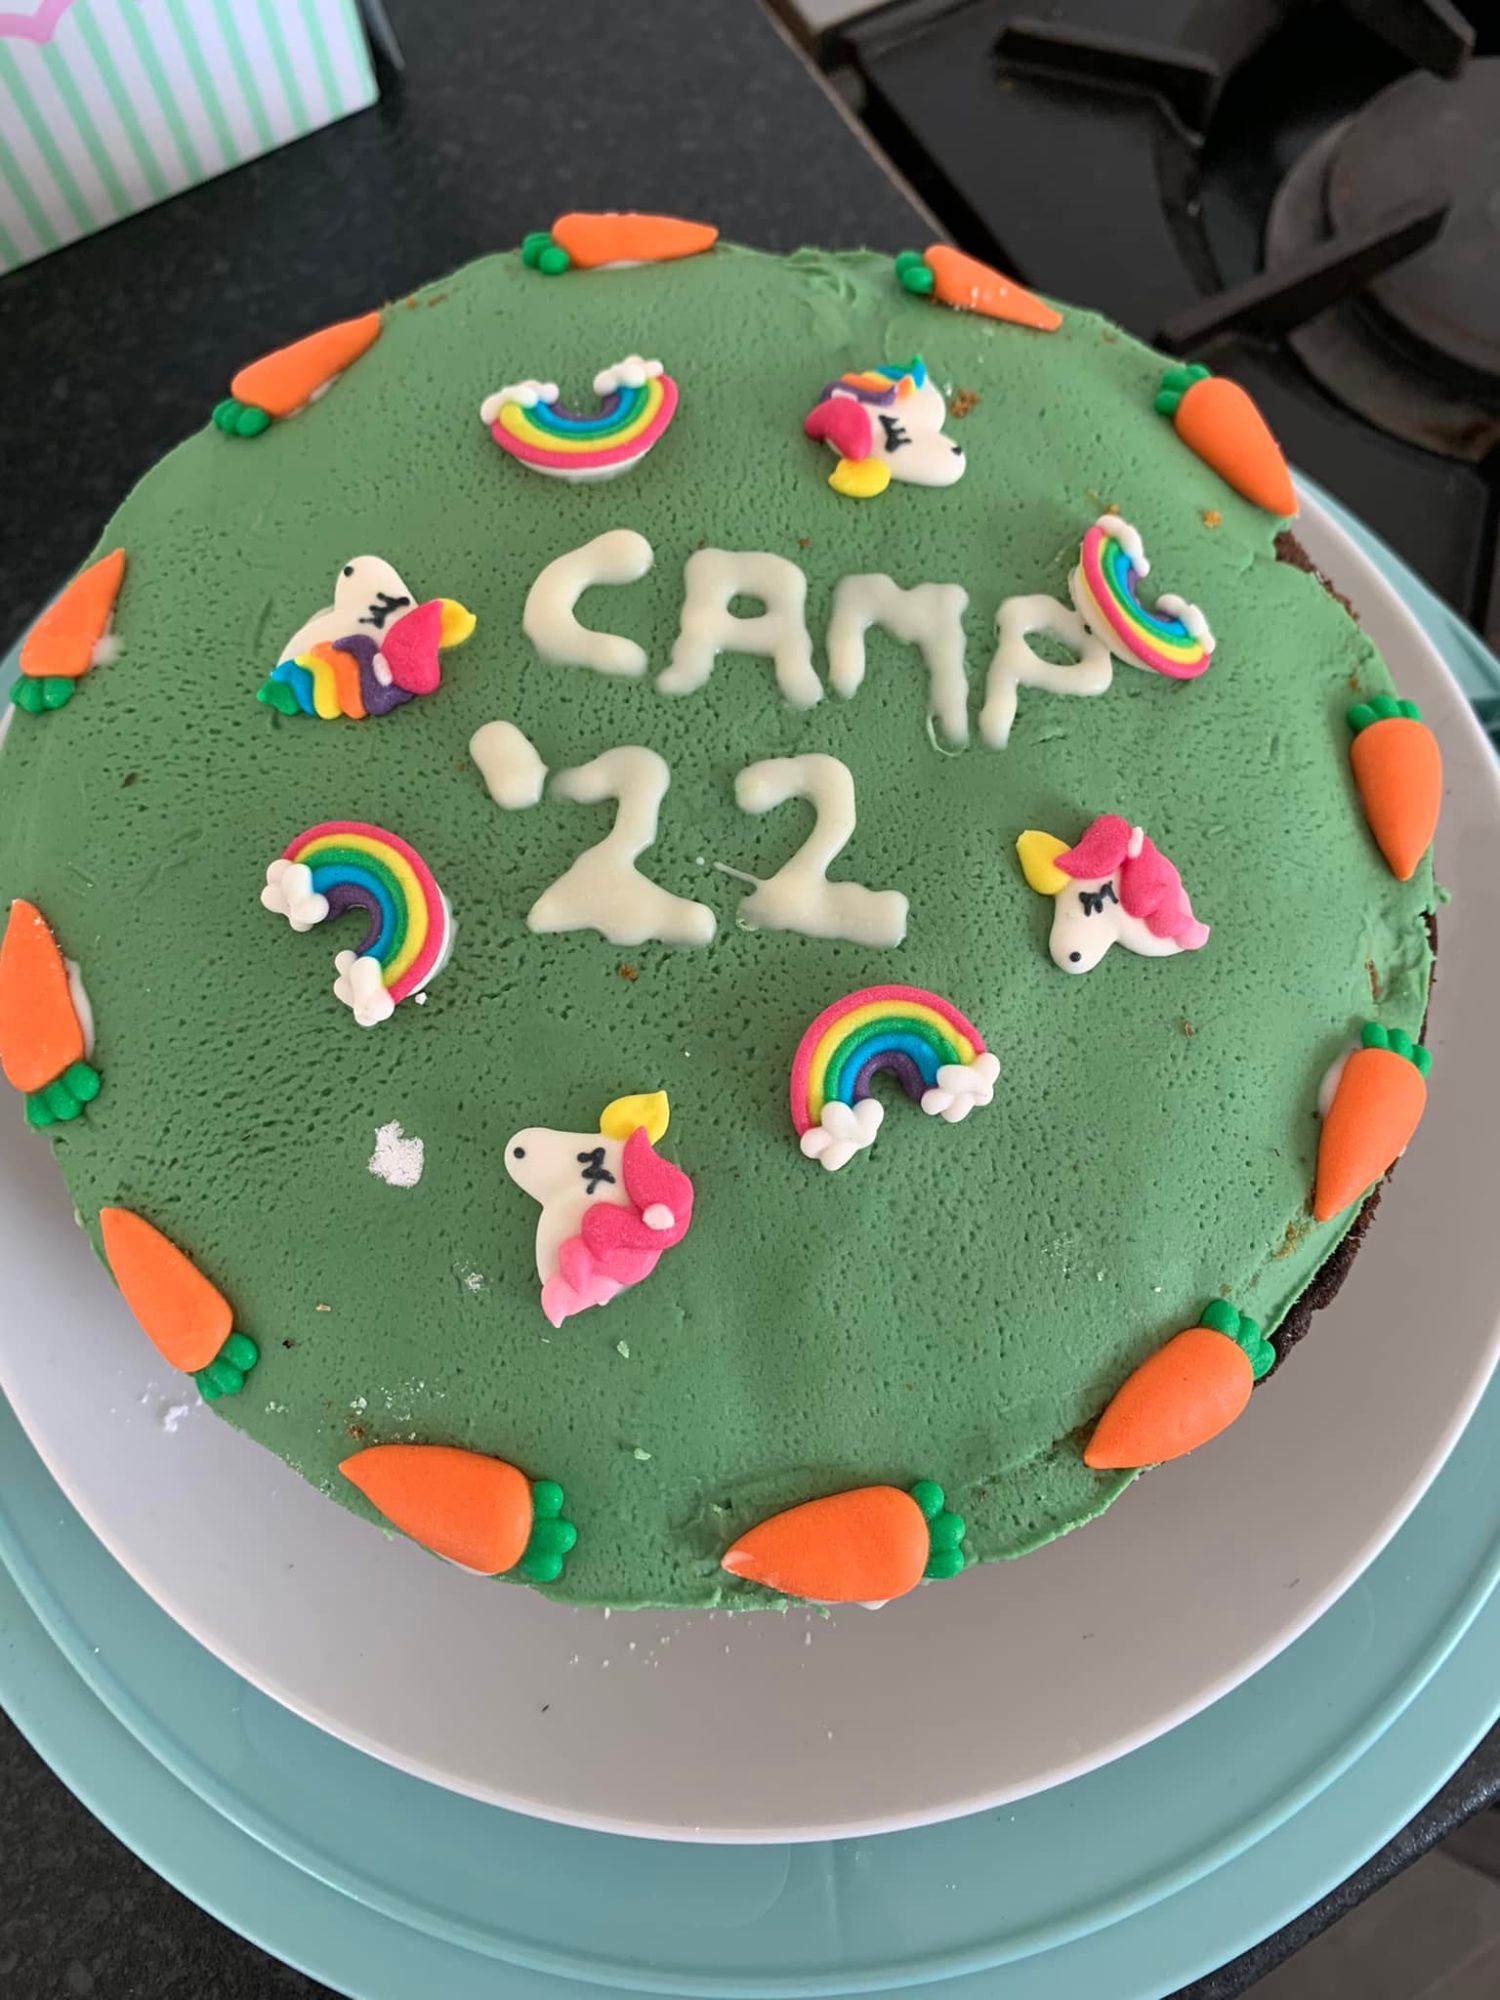 Arkenfield camp cake